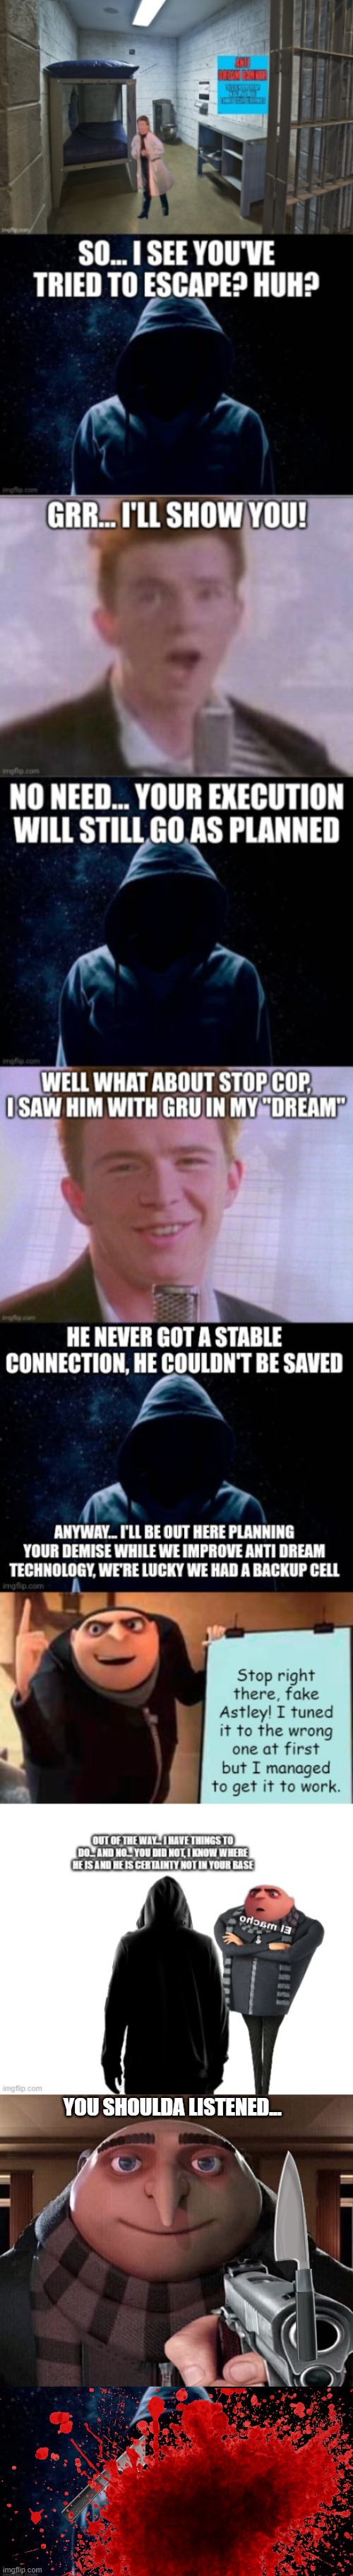 Rick Astley's execution has been postponed indefinitely and freed. | YOU SHOULDA LISTENED... | image tagged in gru gun | made w/ Imgflip meme maker